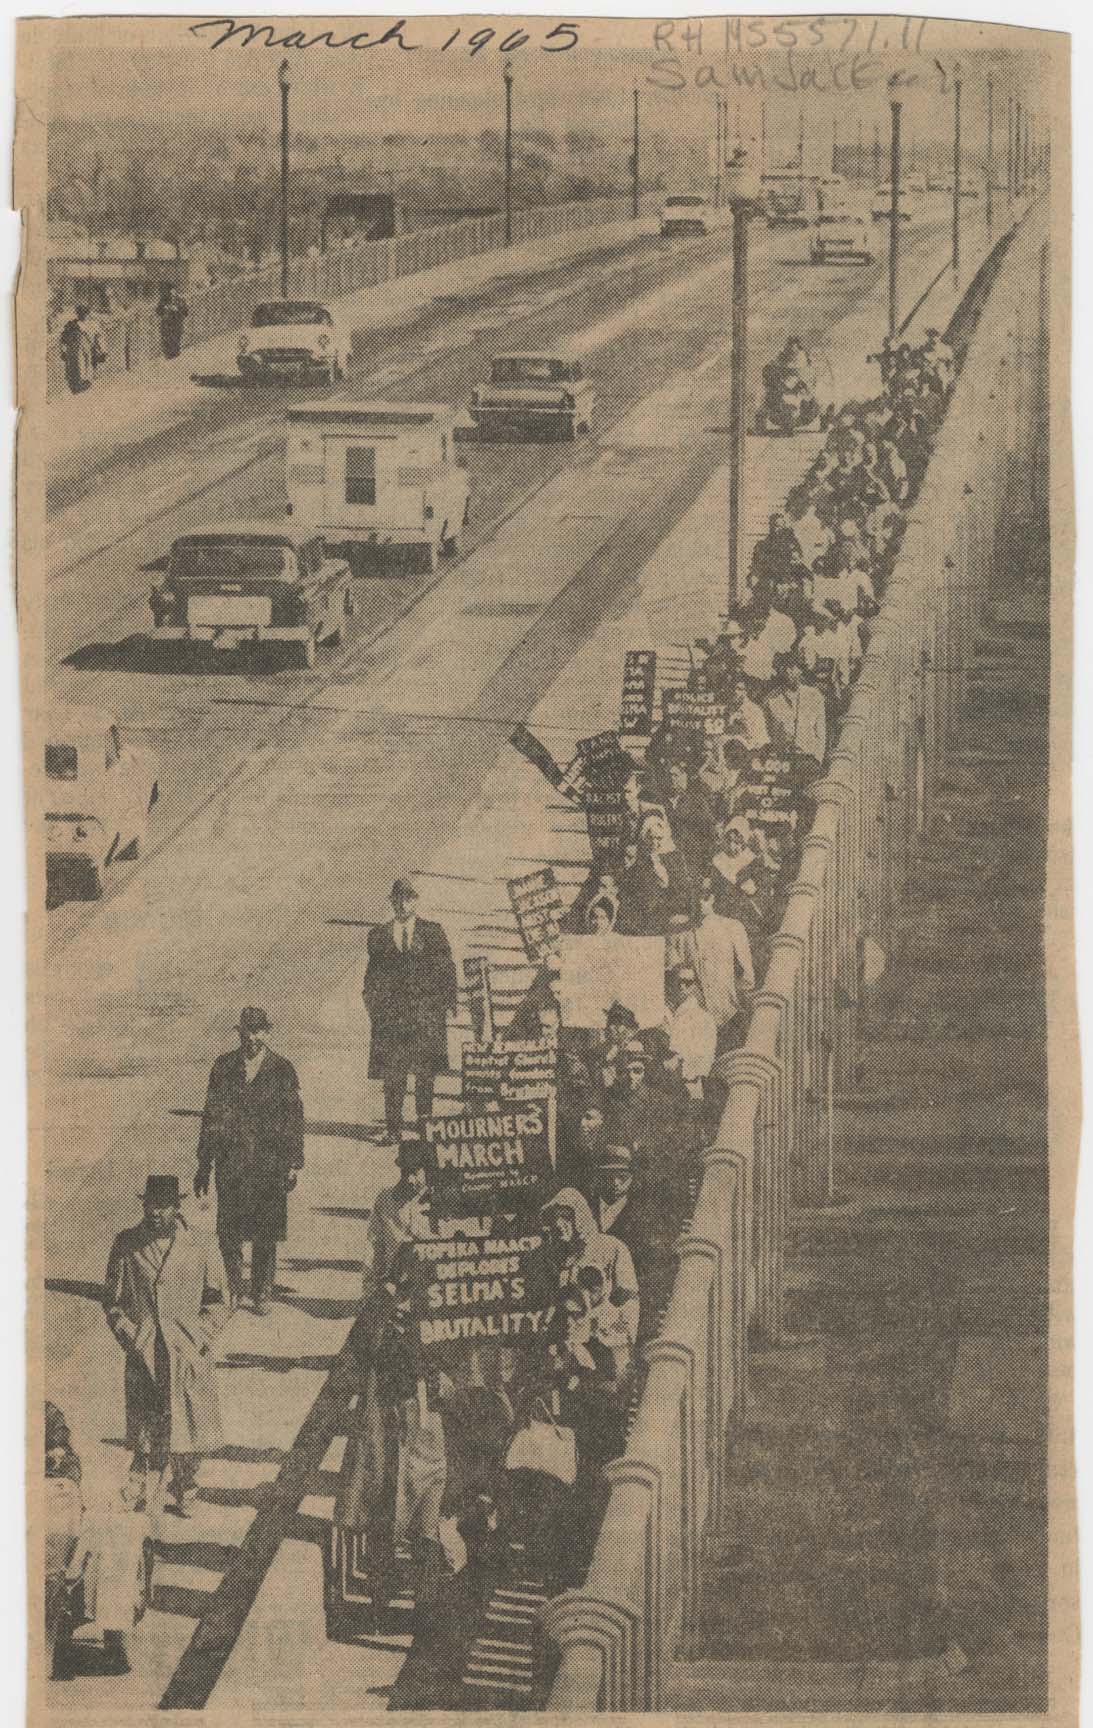 Newspaper clipping of “Topeka Rights March.”